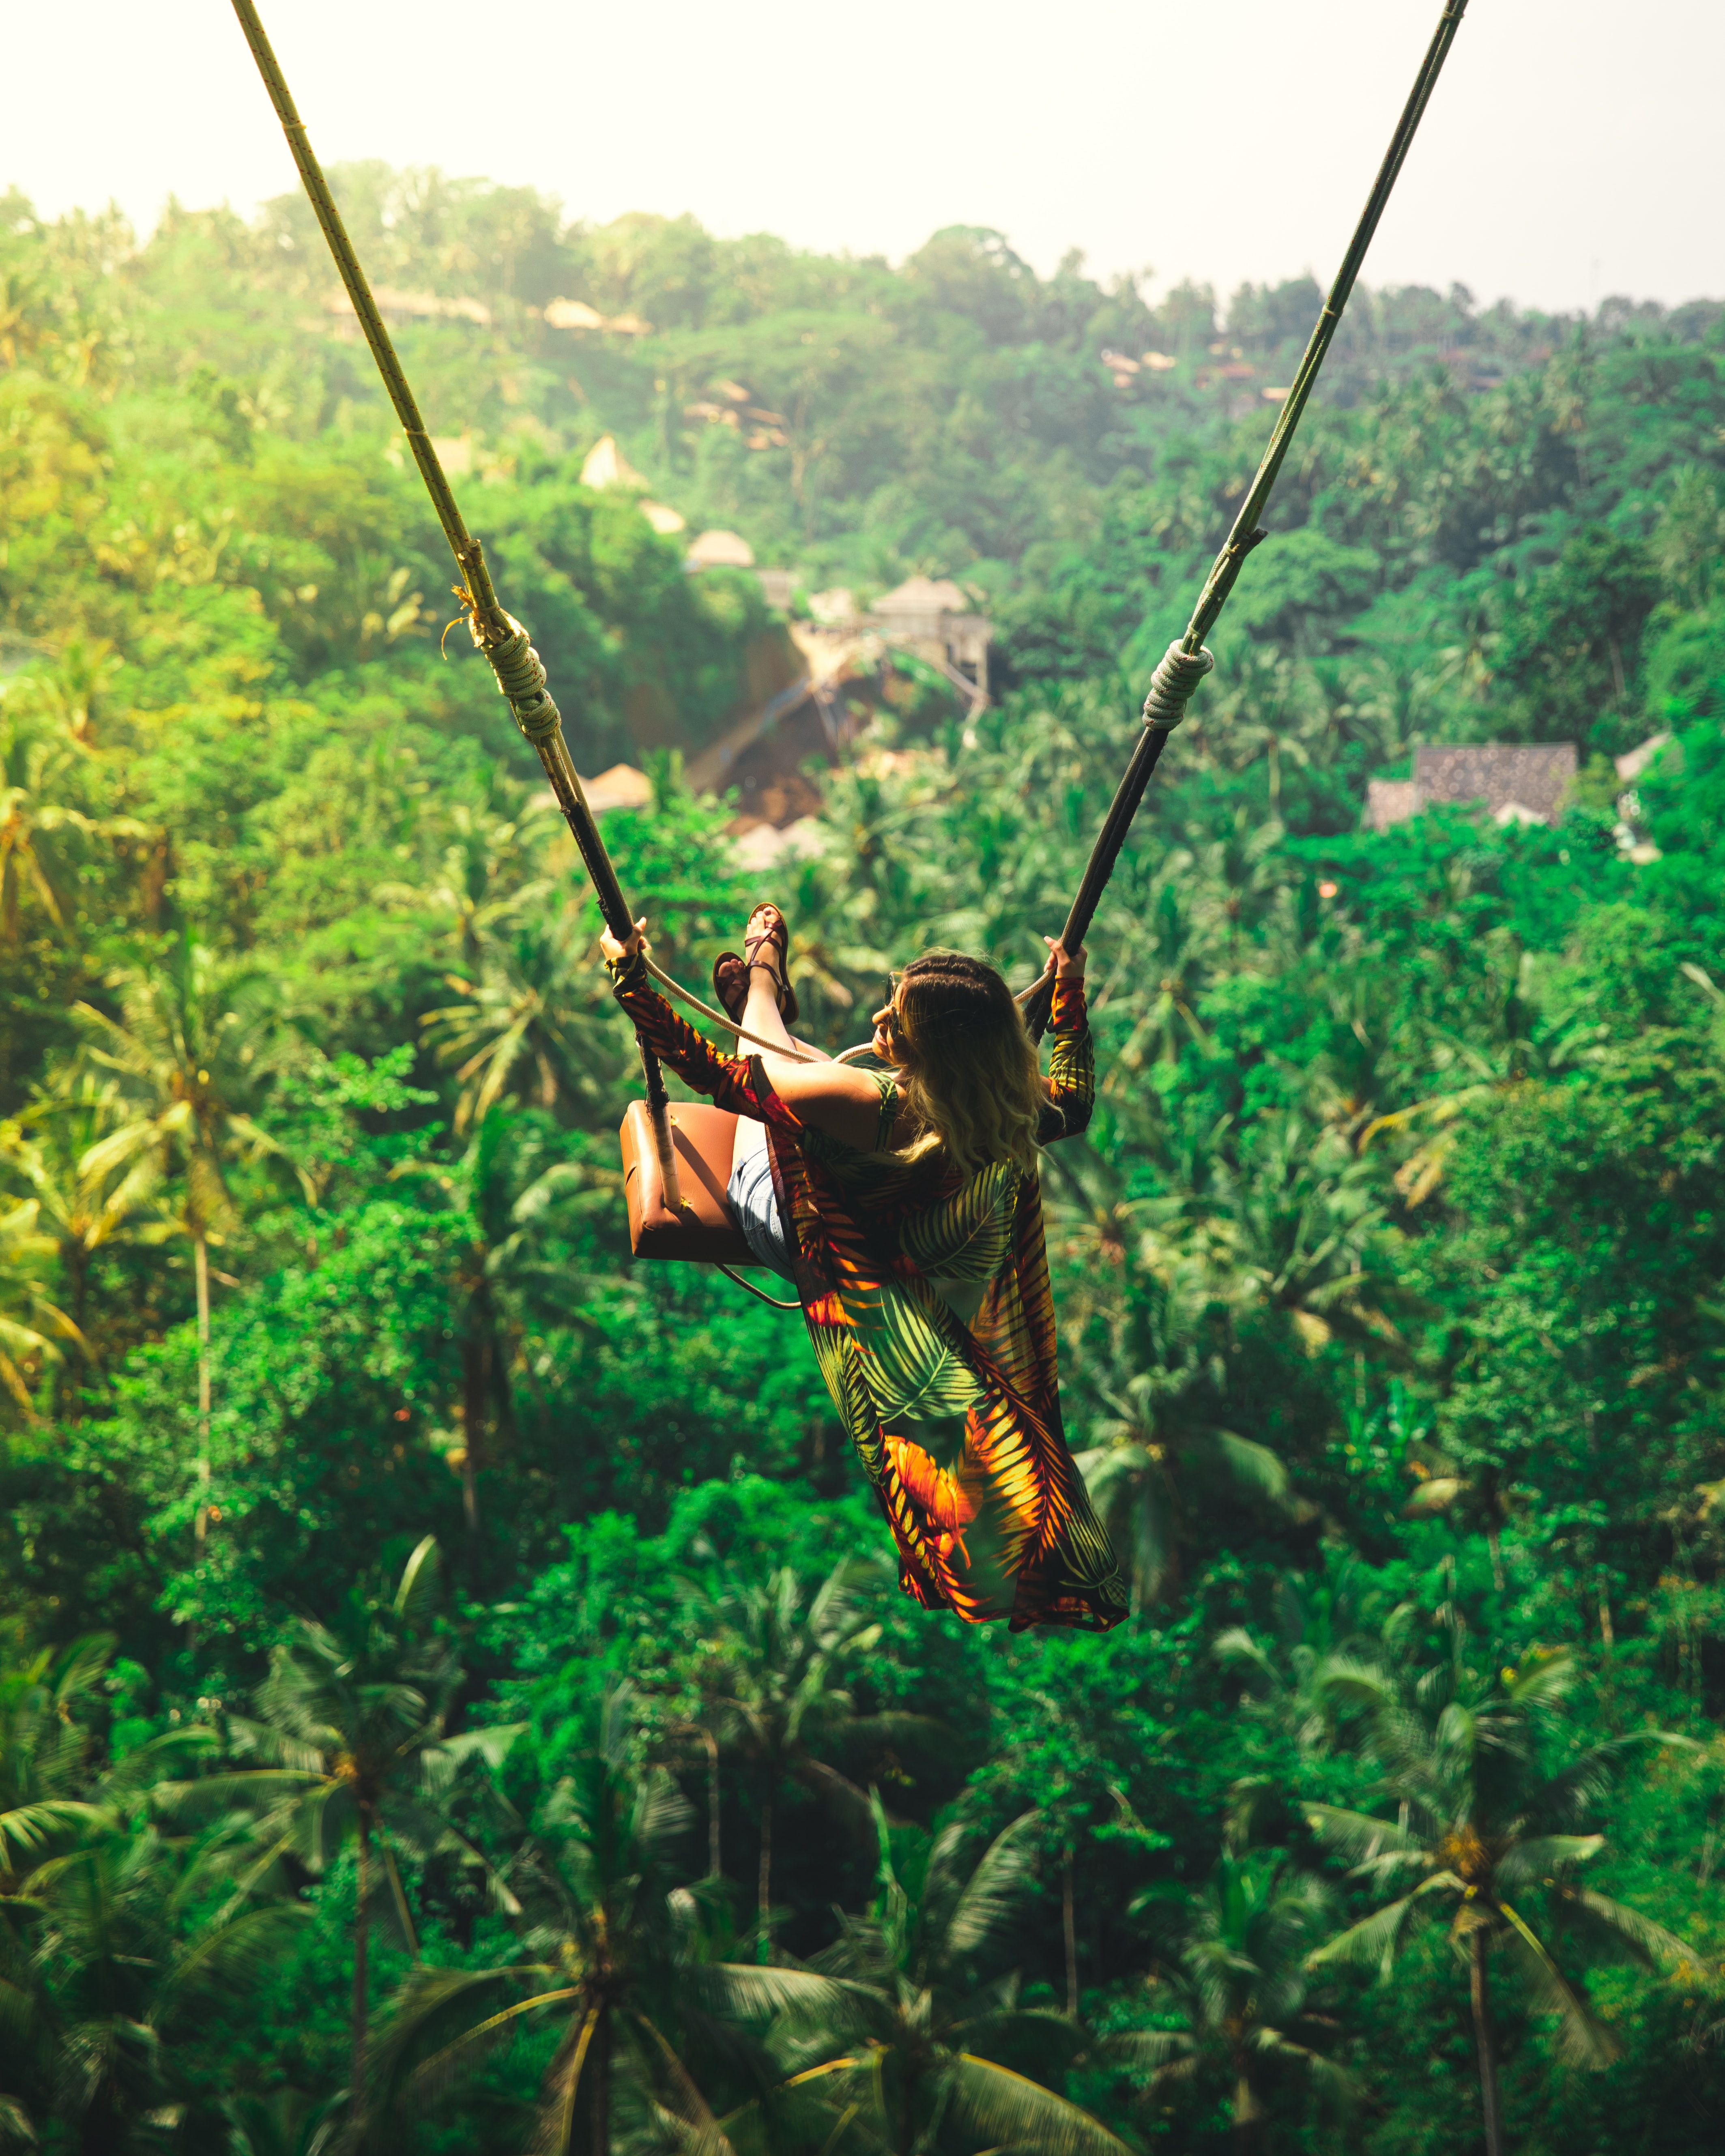 Swing over forest in Bali, Indonesia